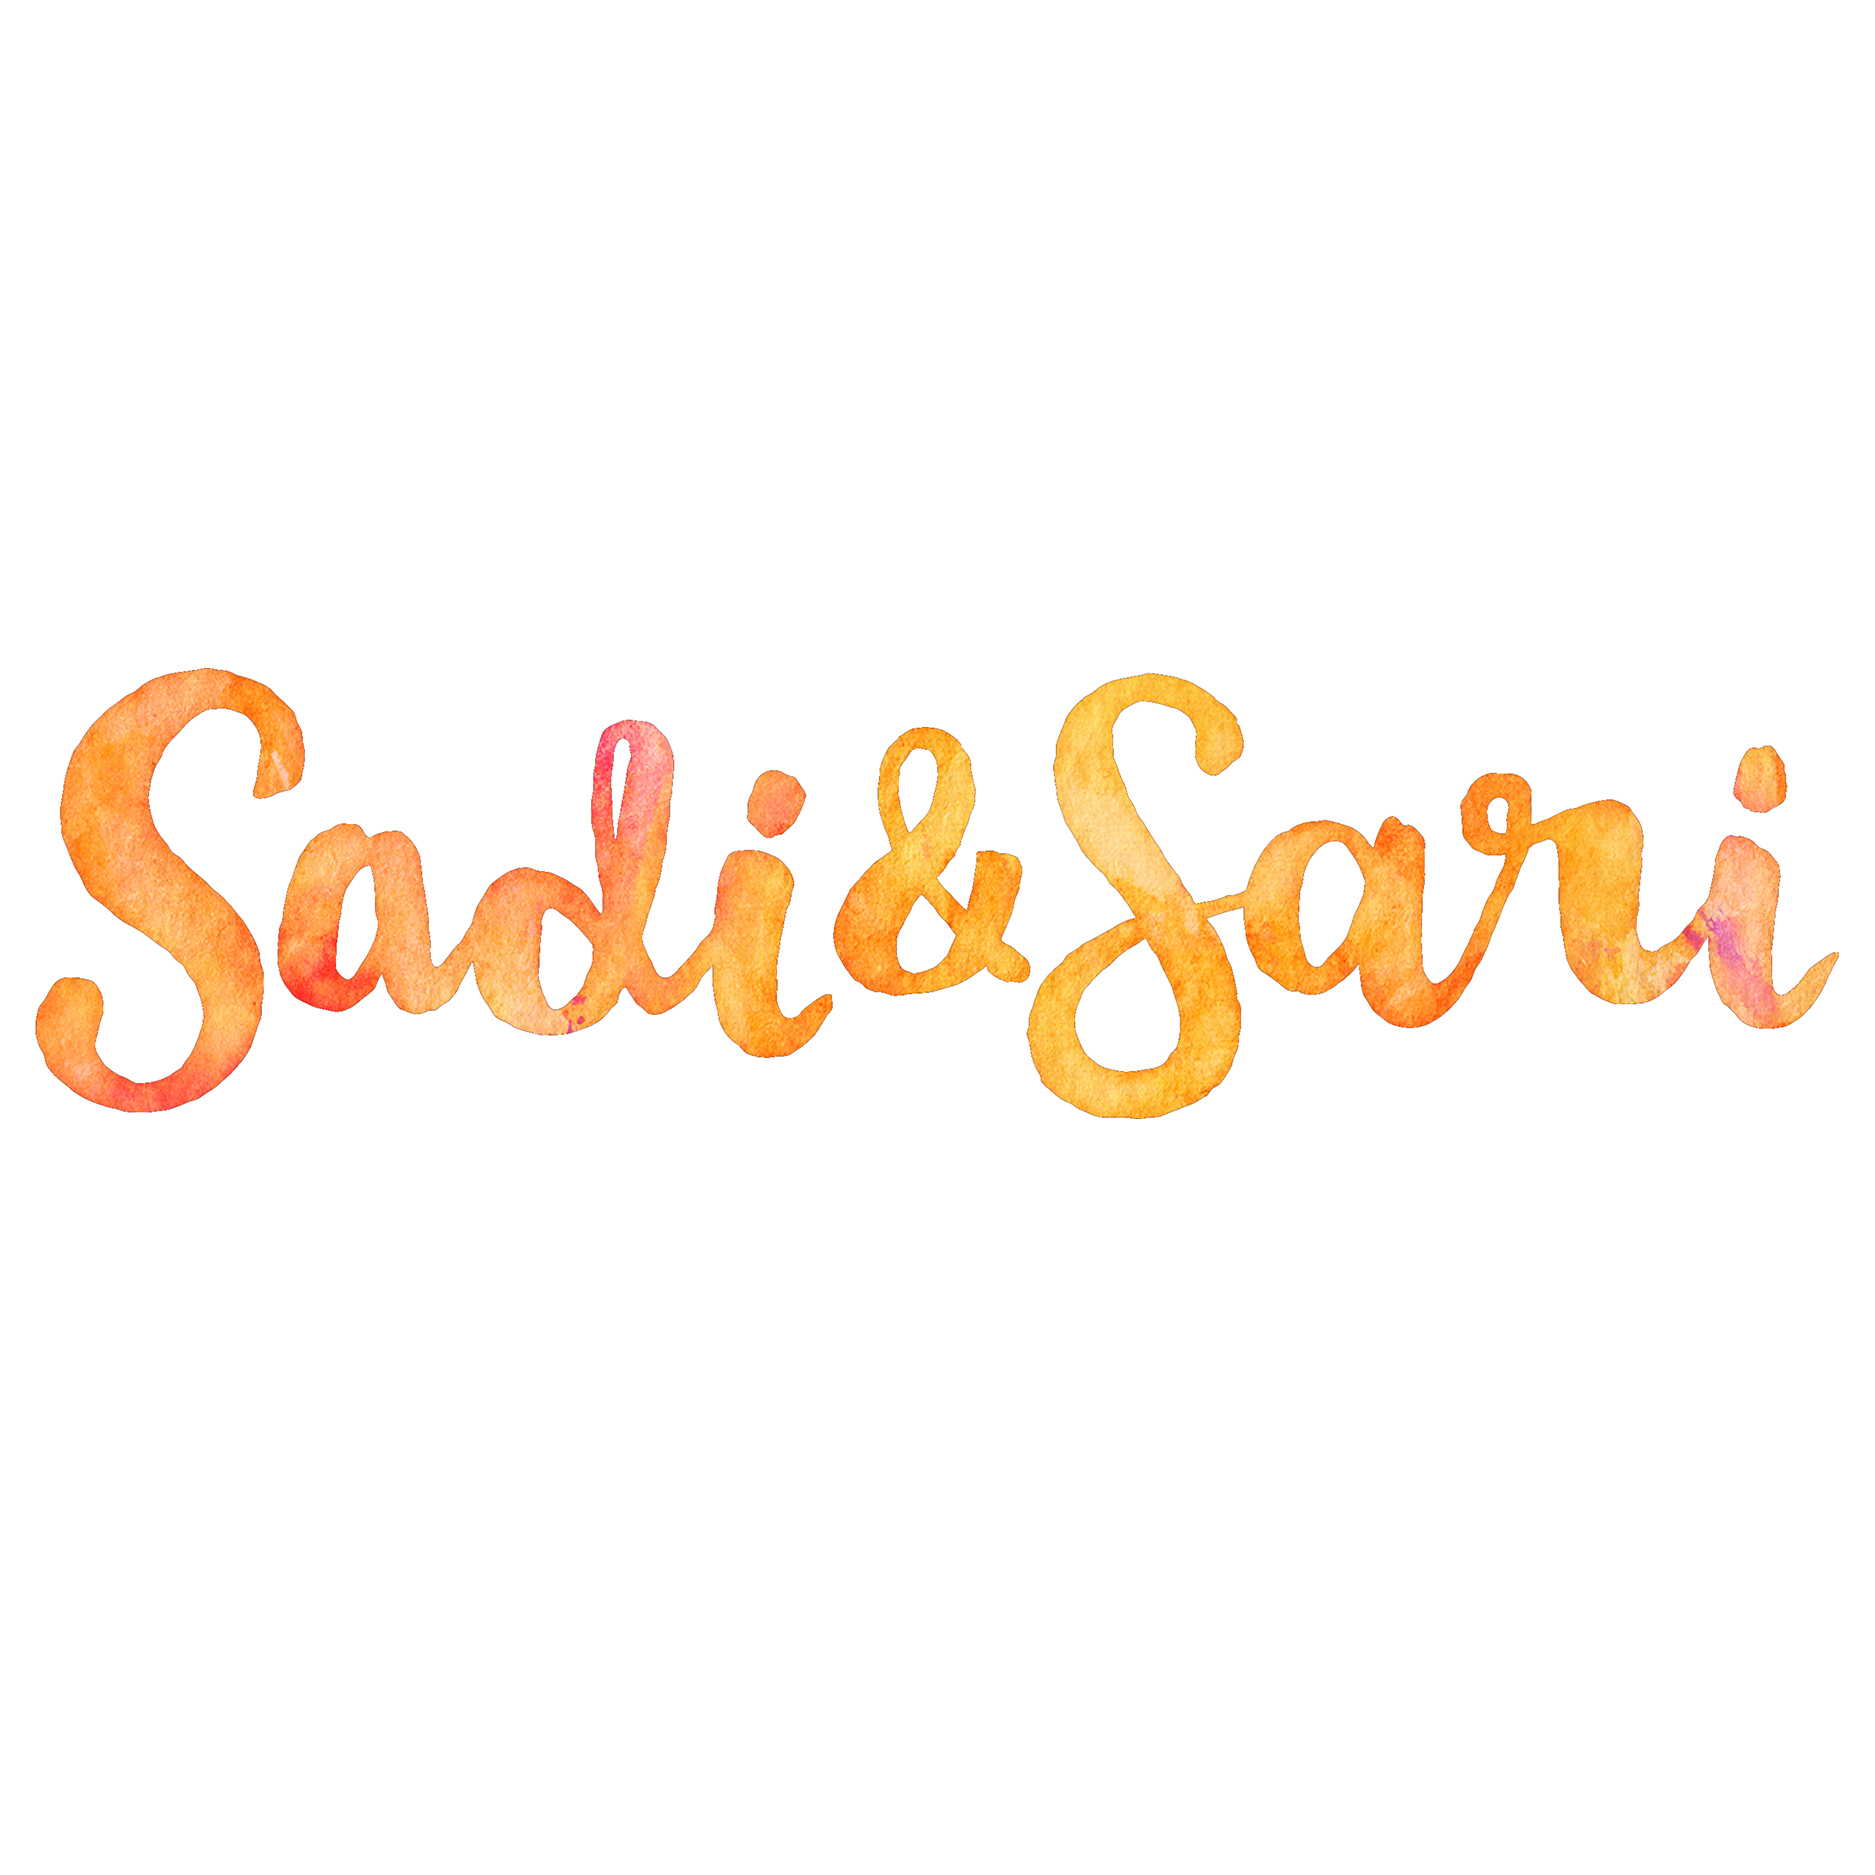 Sadi & Sari logo design by logo designer Carve for your inspiration and for the worlds largest logo competition